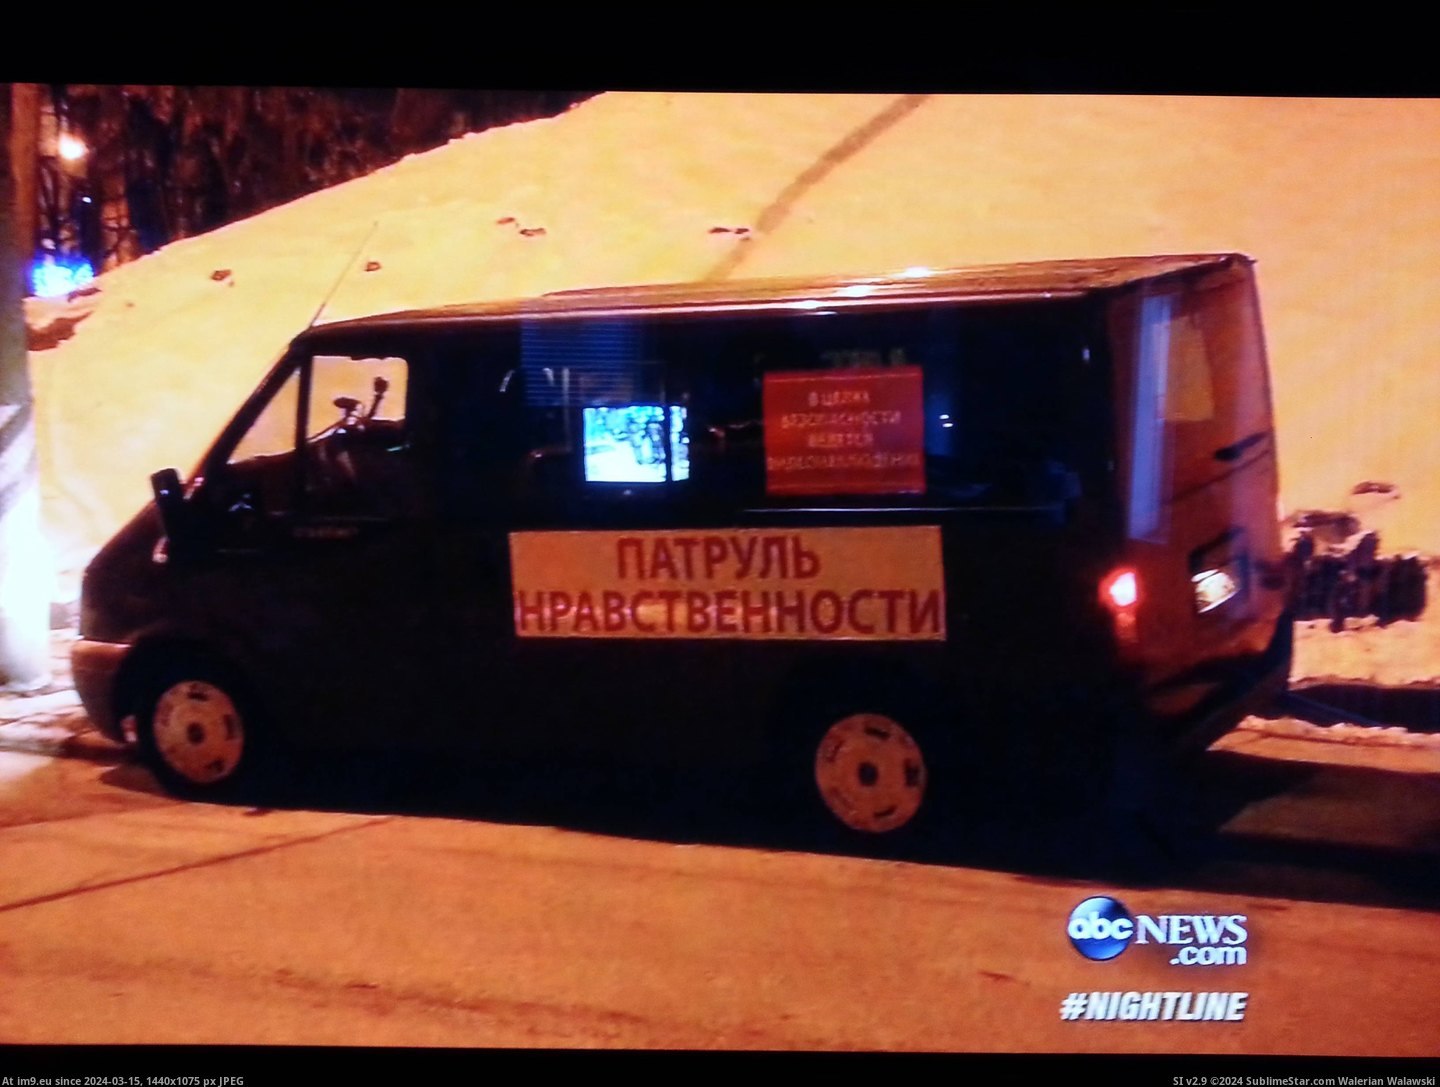 #Wtf #Gay #Night #People #Patrol #Monitors #Morality #Van #Club #Russia #Records [Wtf] Morality patrol van monitors and records all people that come and go in a gay night club in Russia. Pic. (Image of album ))